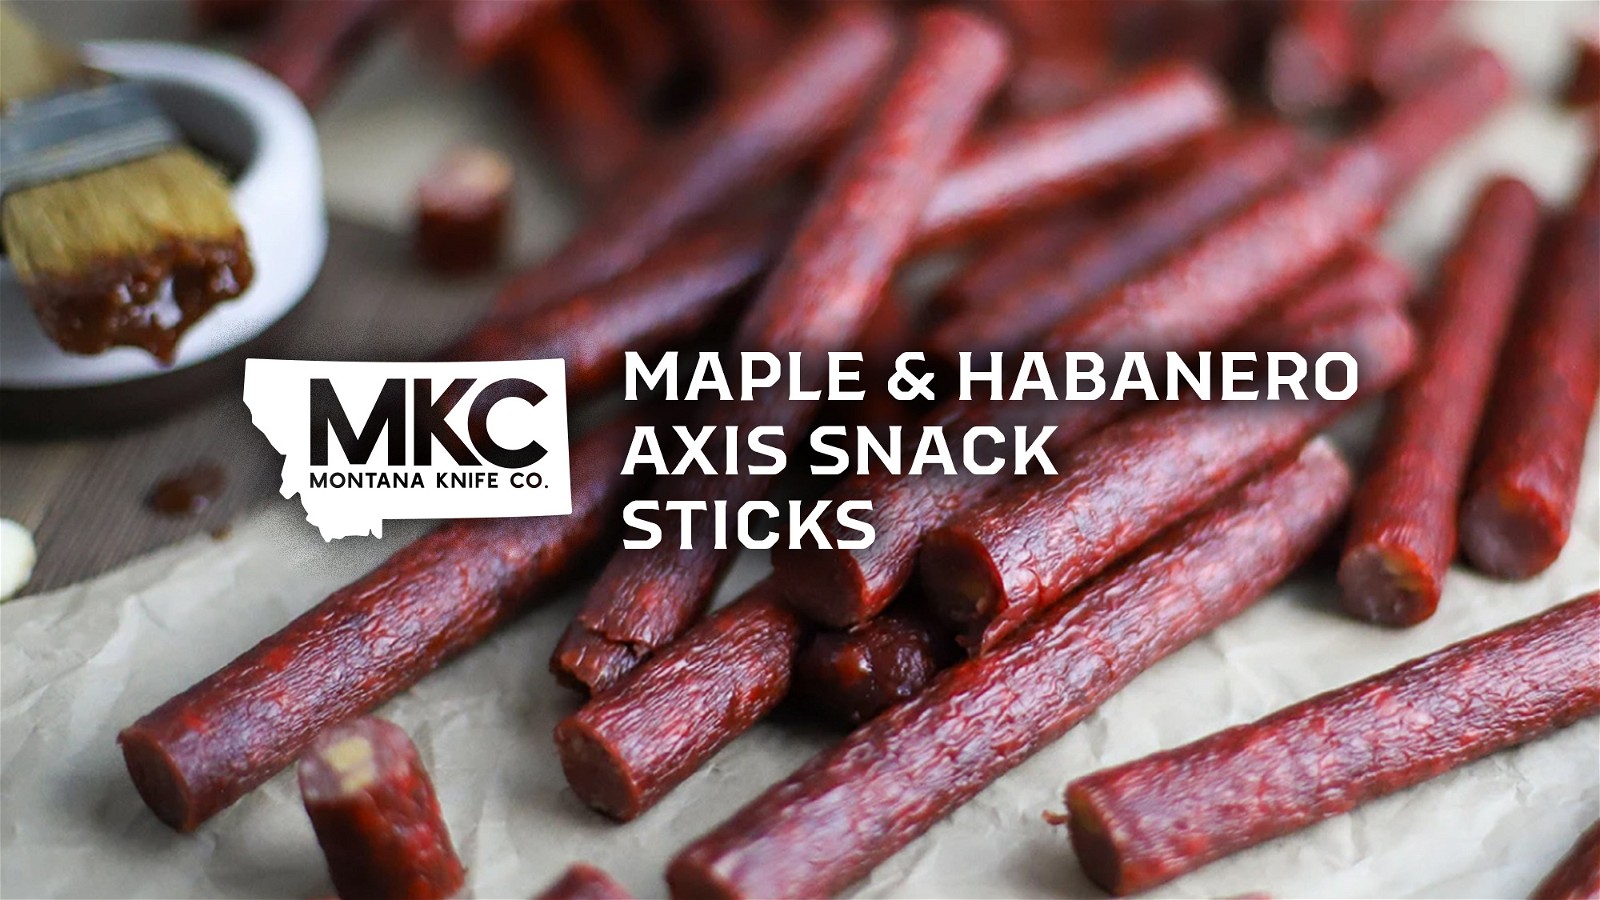 Image of Maple and Habanero Axis Snack Sticks